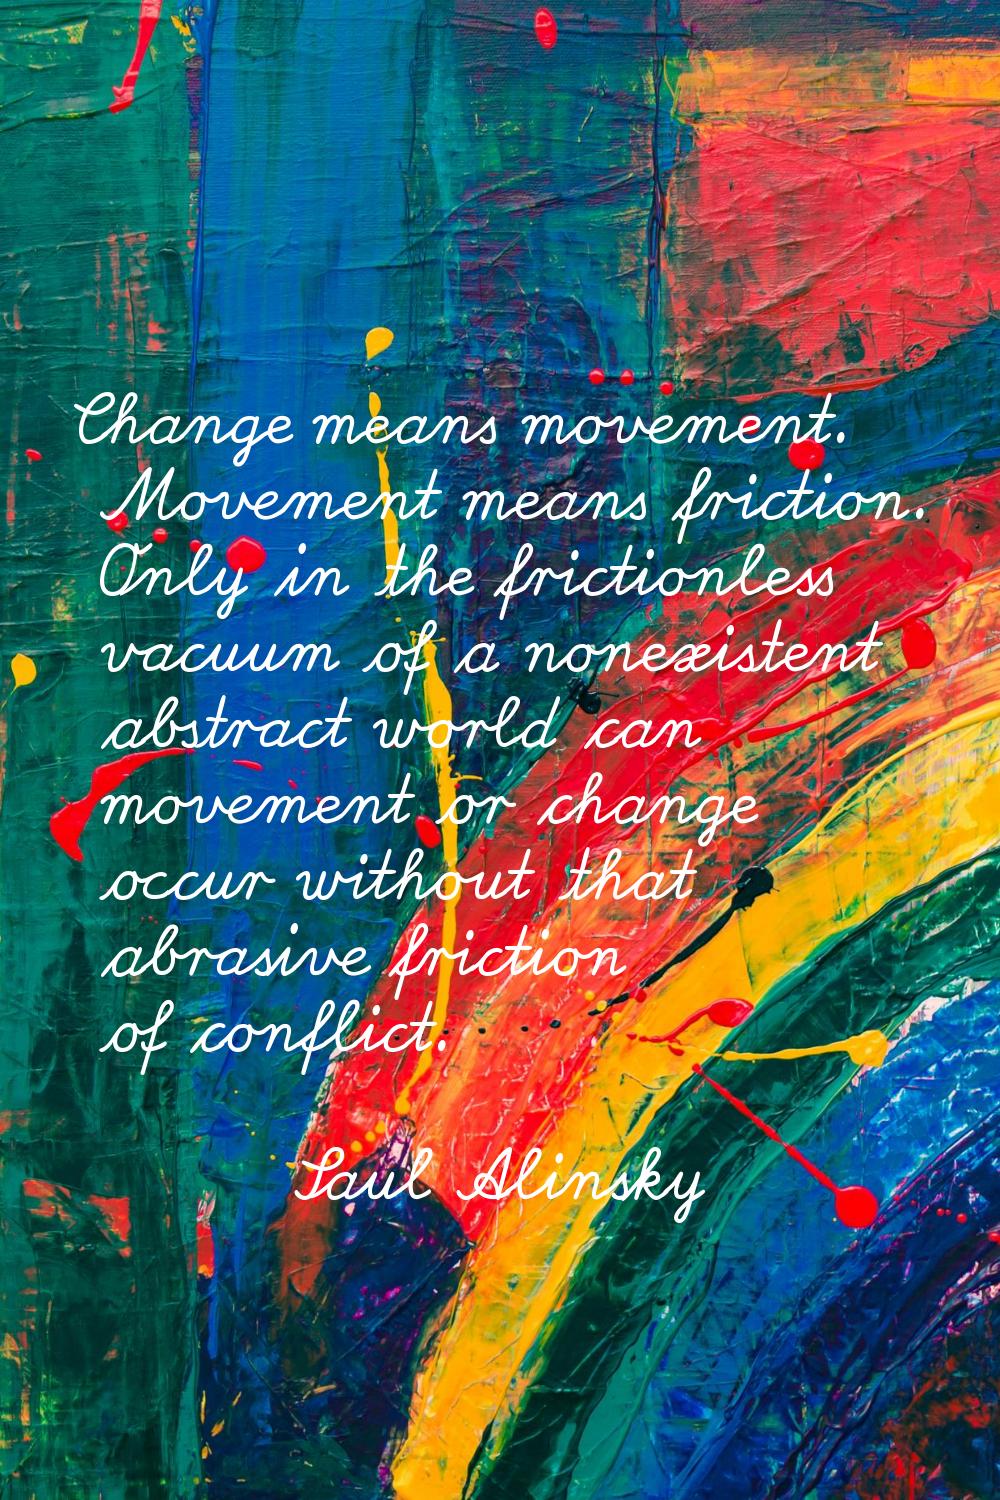 Change means movement. Movement means friction. Only in the frictionless vacuum of a nonexistent ab